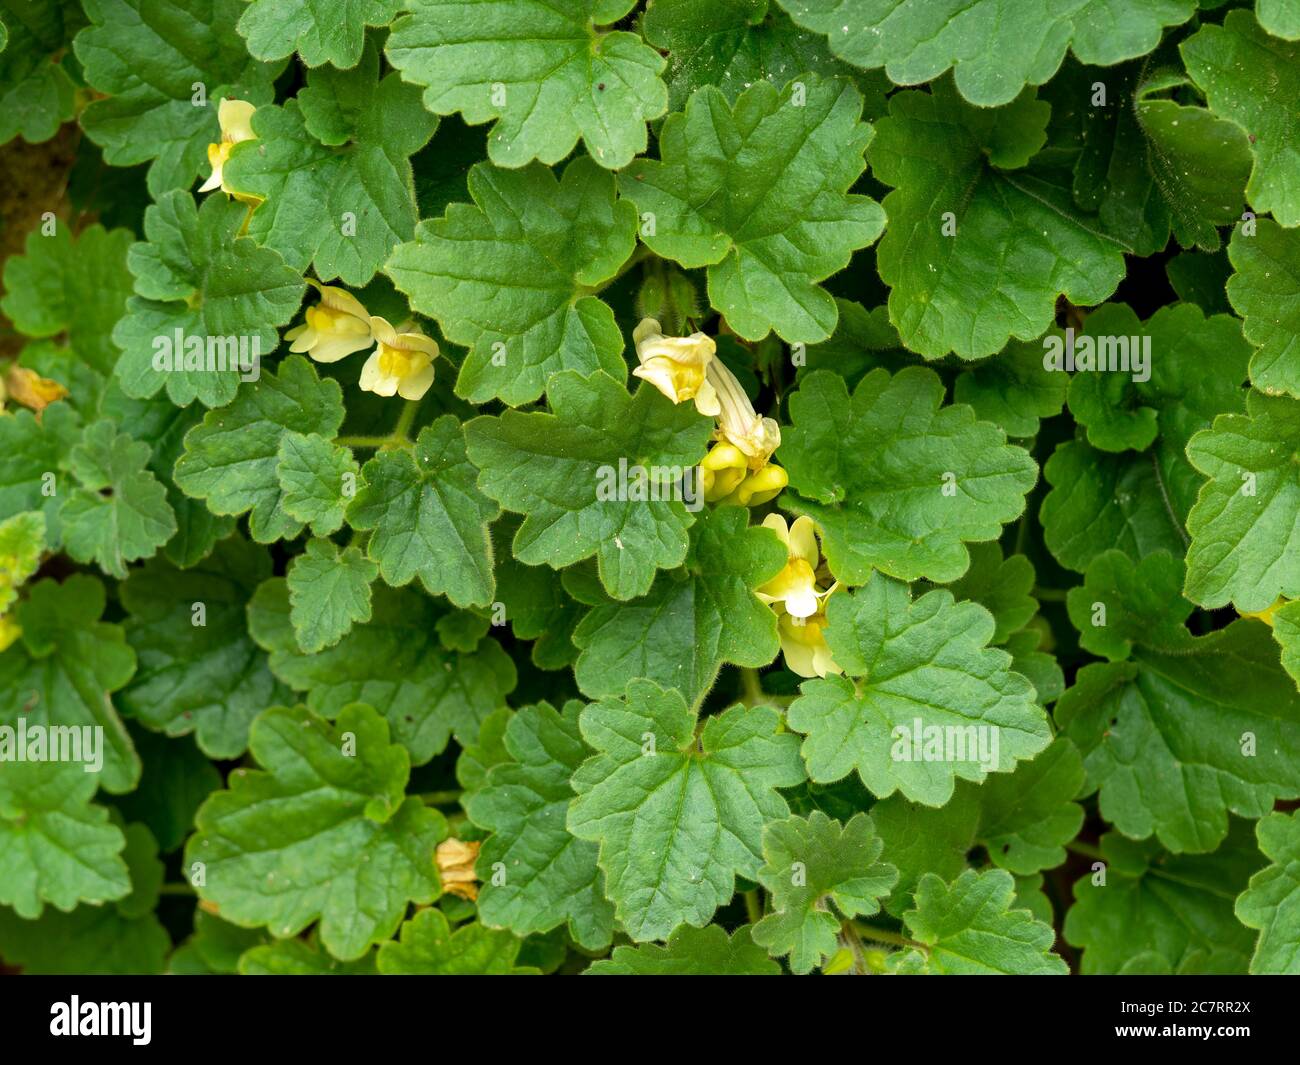 Green leaves and yellow flowers of trailing snapdragon, Asarina procumbens, growing on a stone wall Stock Photo